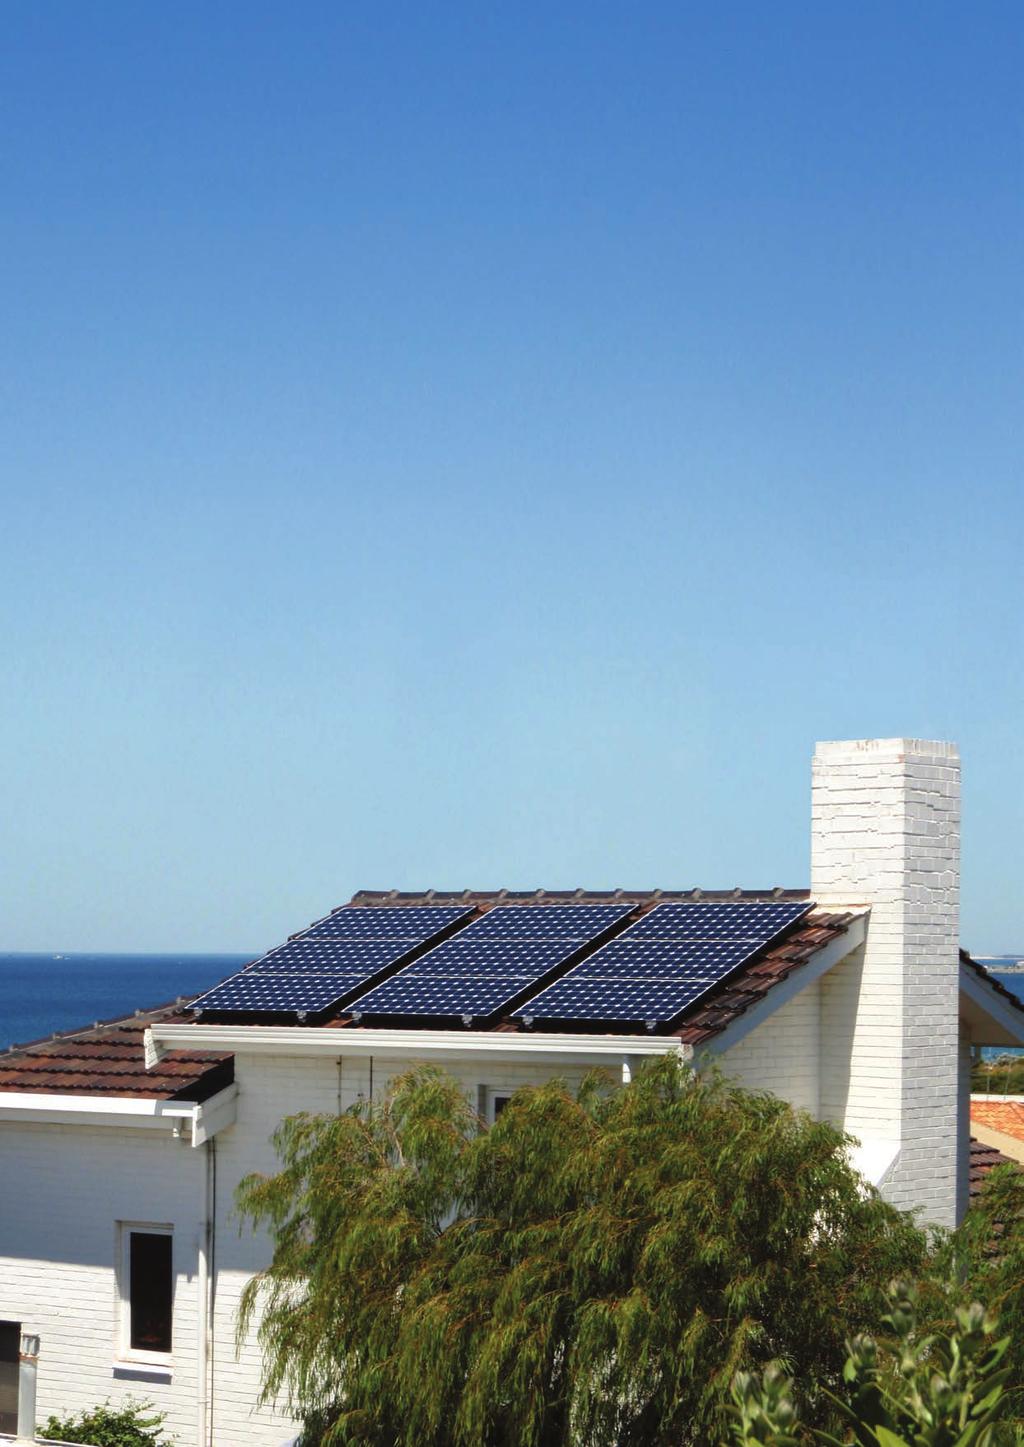 More energy for your home SunPower high efficiency solar technology is the best choice for space-constrained rooftops, given its higher energy production per square metre which translates in greater